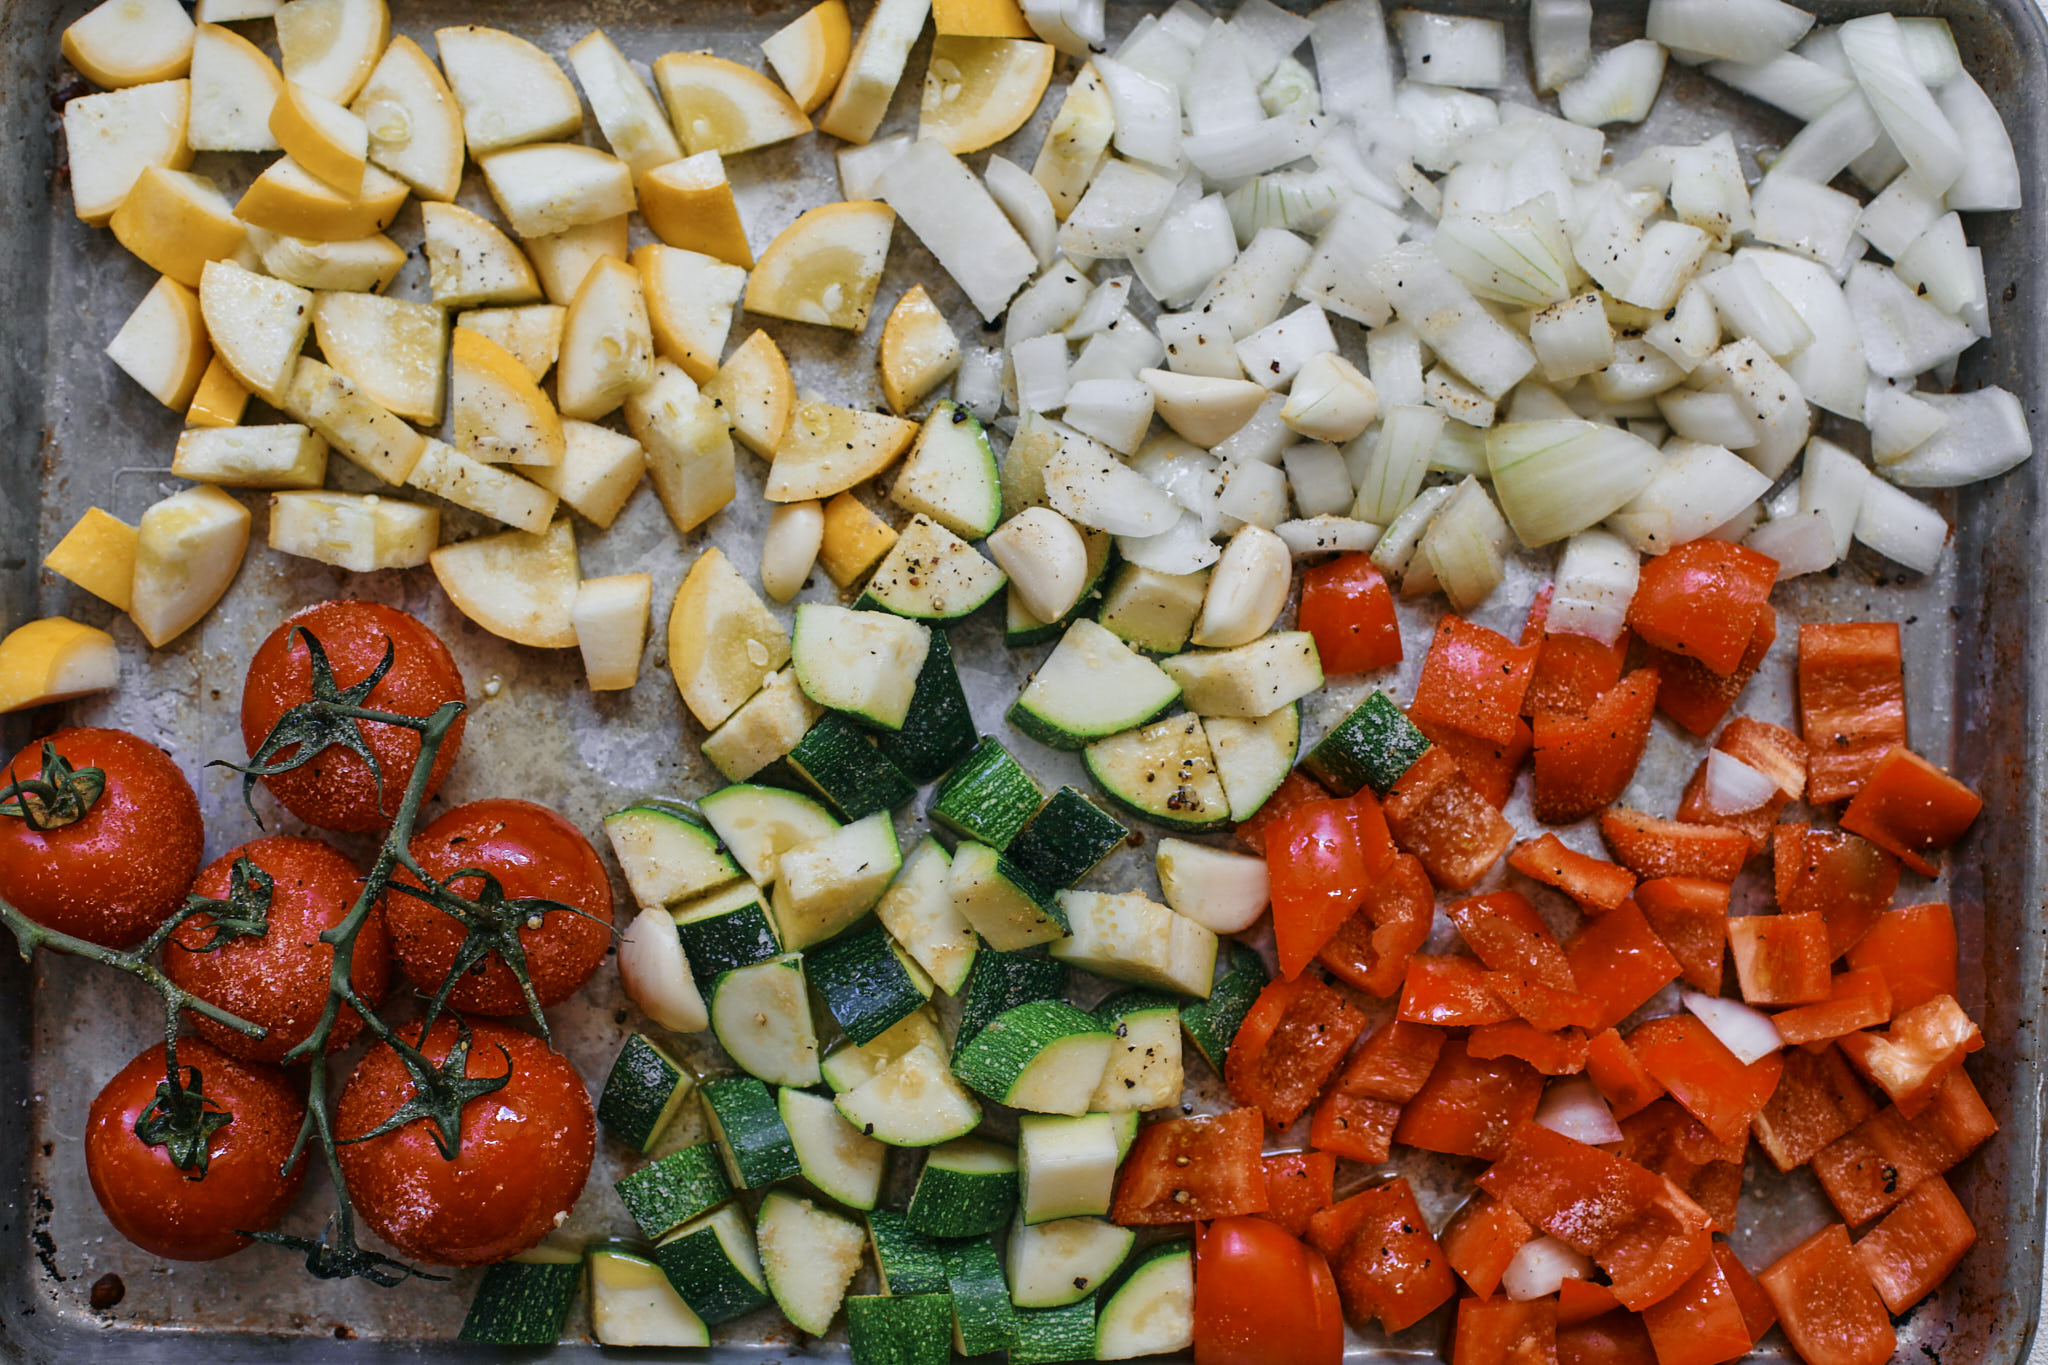 chopped vegetables ready to be roasted